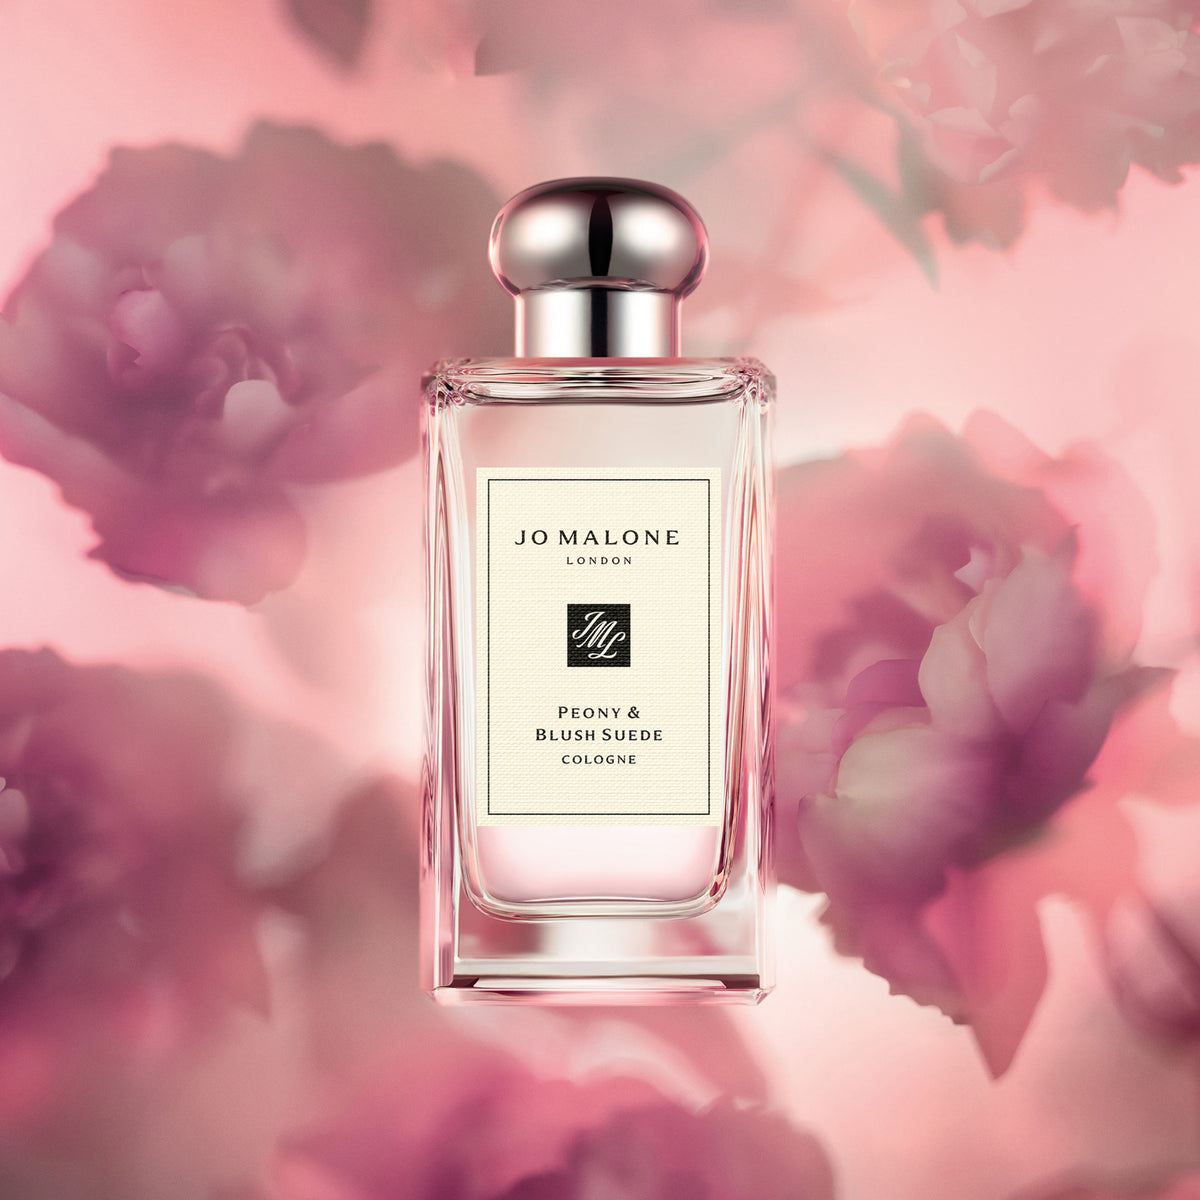 Jo Malone London Peony and Blush Suede Cologne .